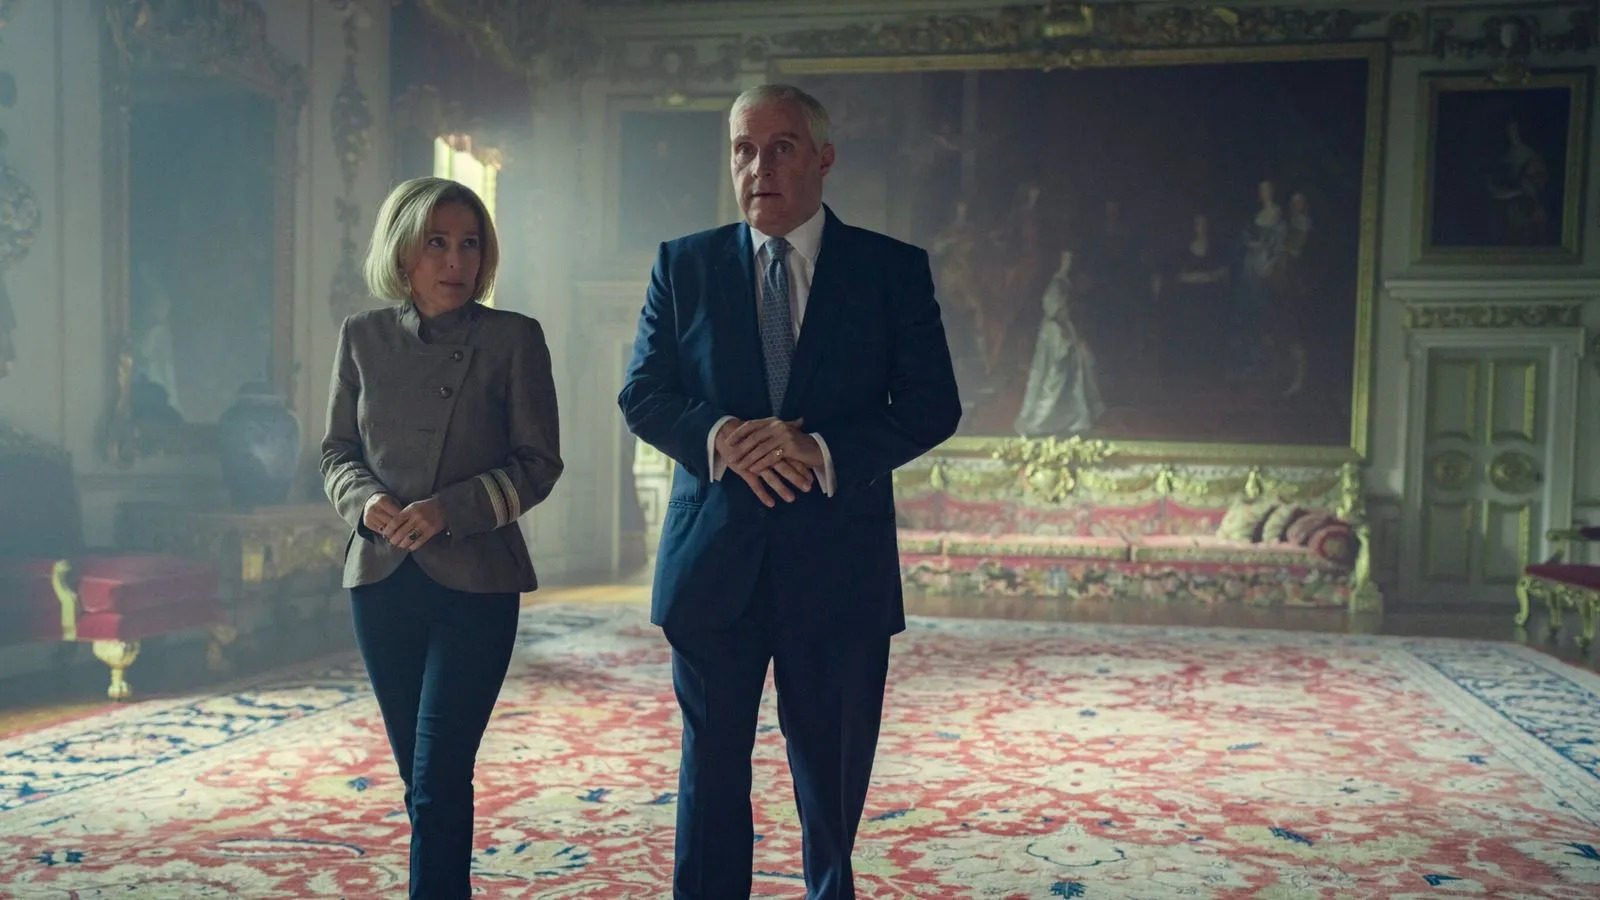 Gillian Anderson (left) as BBC journalist Emily Maitlis in a still from Scoop, a Netflix dramatisation of her 2019 interview with Britain’s Prince Andrew (played by Rufus Sewell) about allegations against him of sexual misconduct involving American Jeffrey Epstein. Photo: Netflix